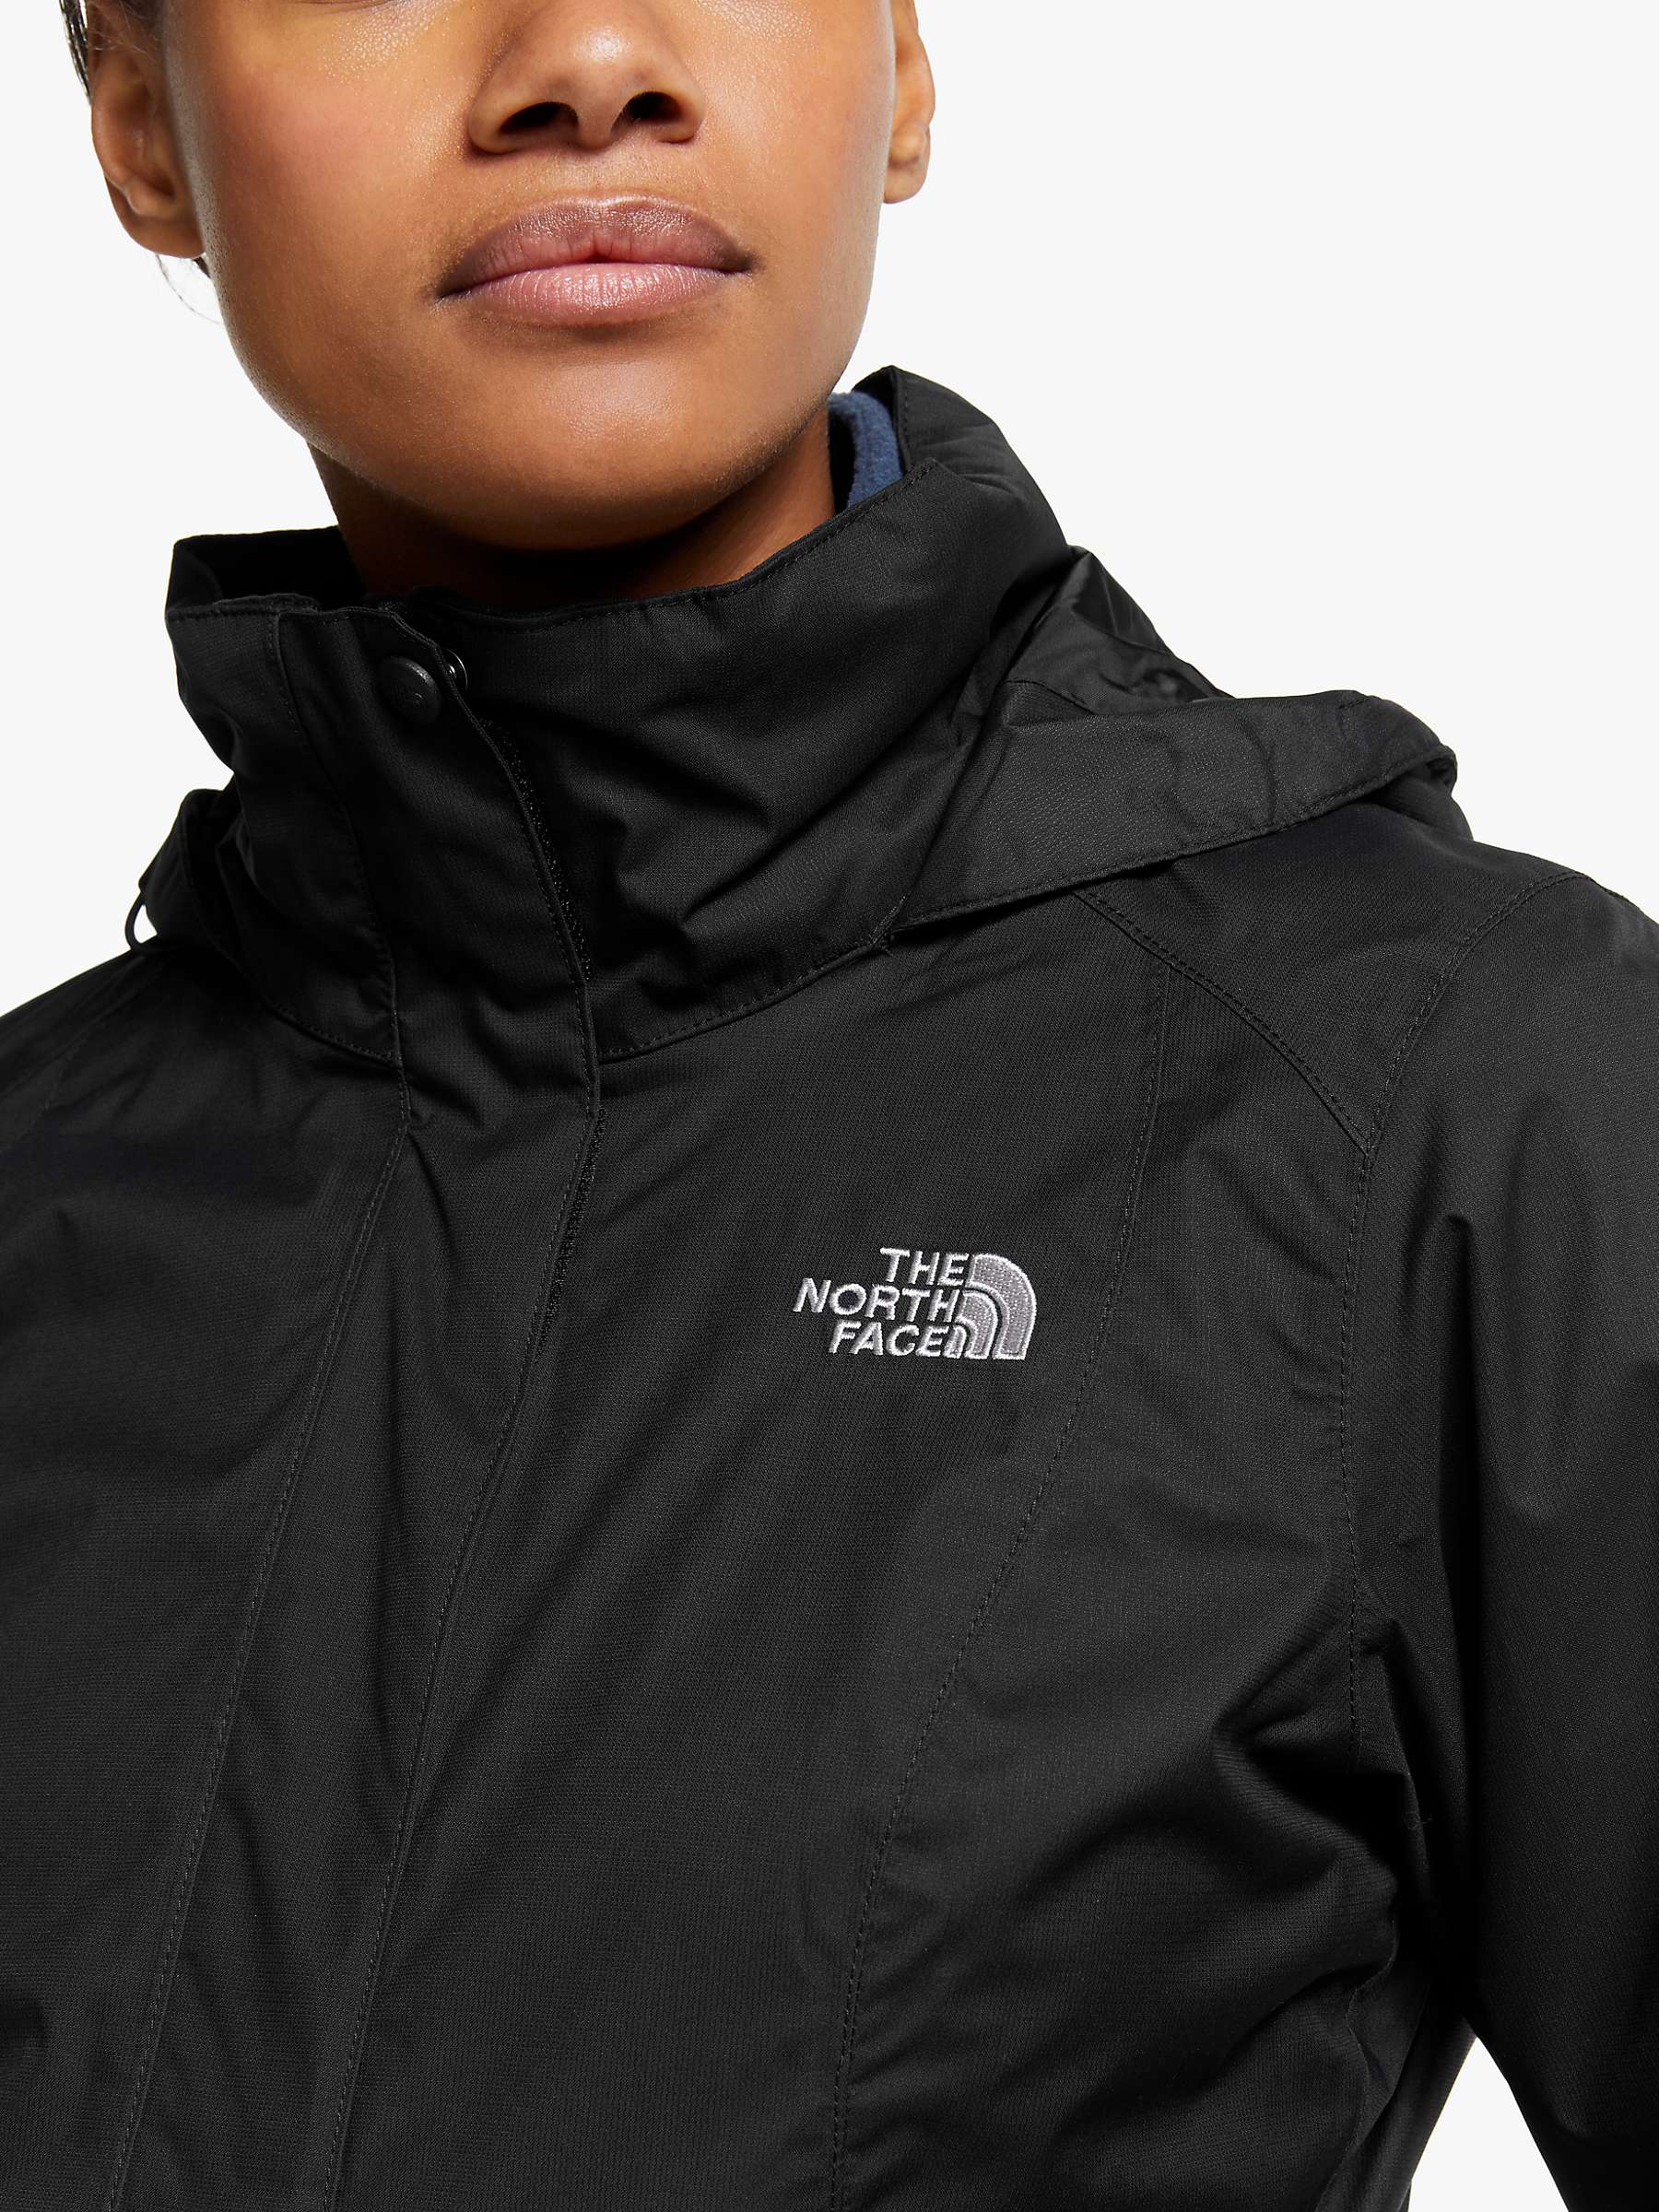 Buy The North Face Evolve II Triclimate 3-in-1 Waterproof Women's Jacket Online at johnlewis.com